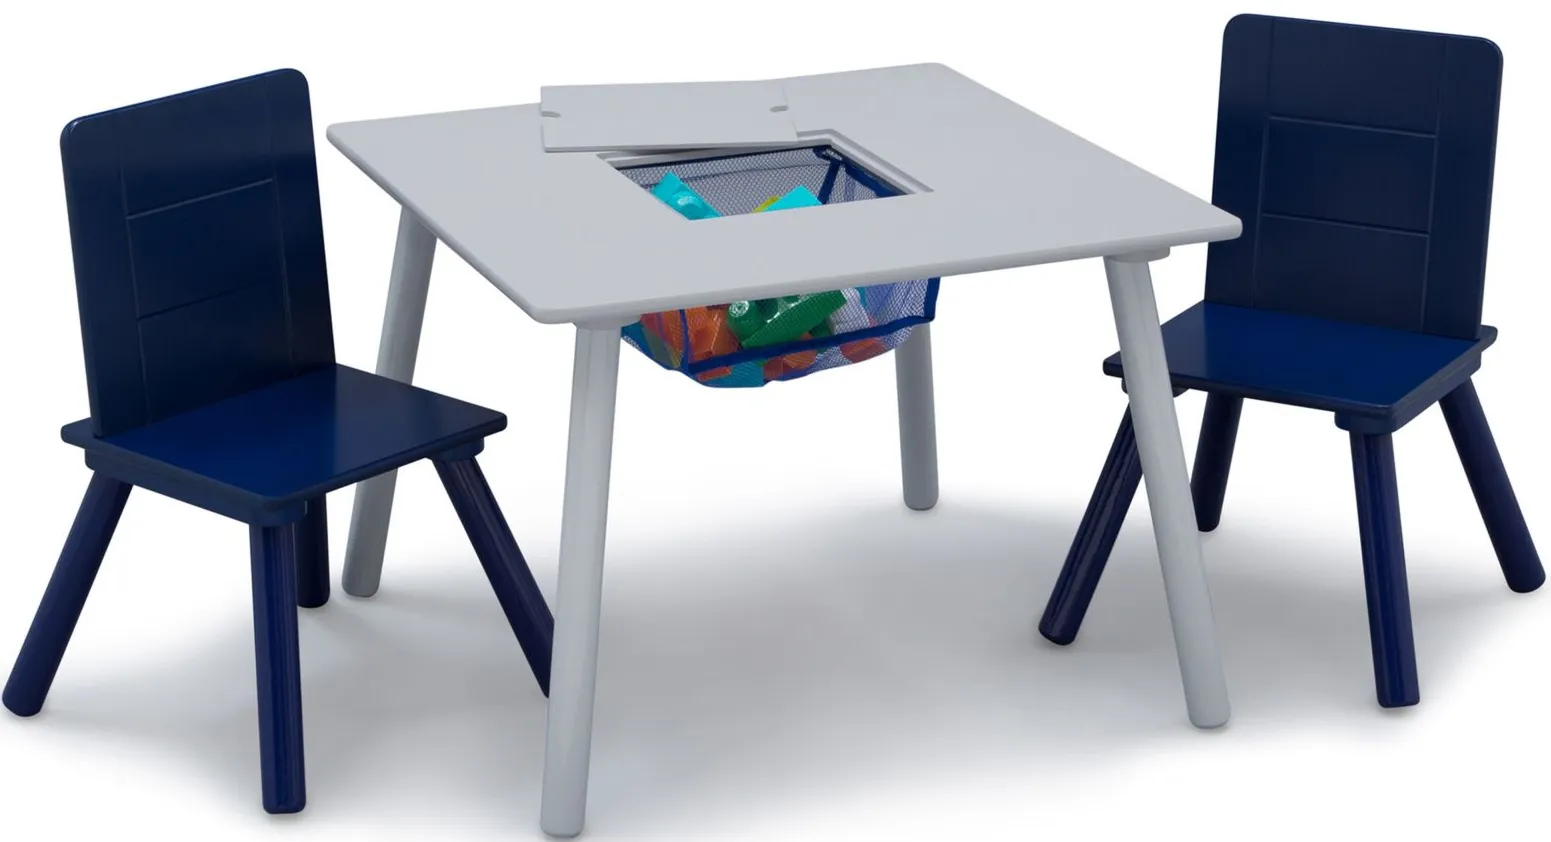 Table and Two Chair Set with Storage by Delta Children in Gray/Blue by Delta Children